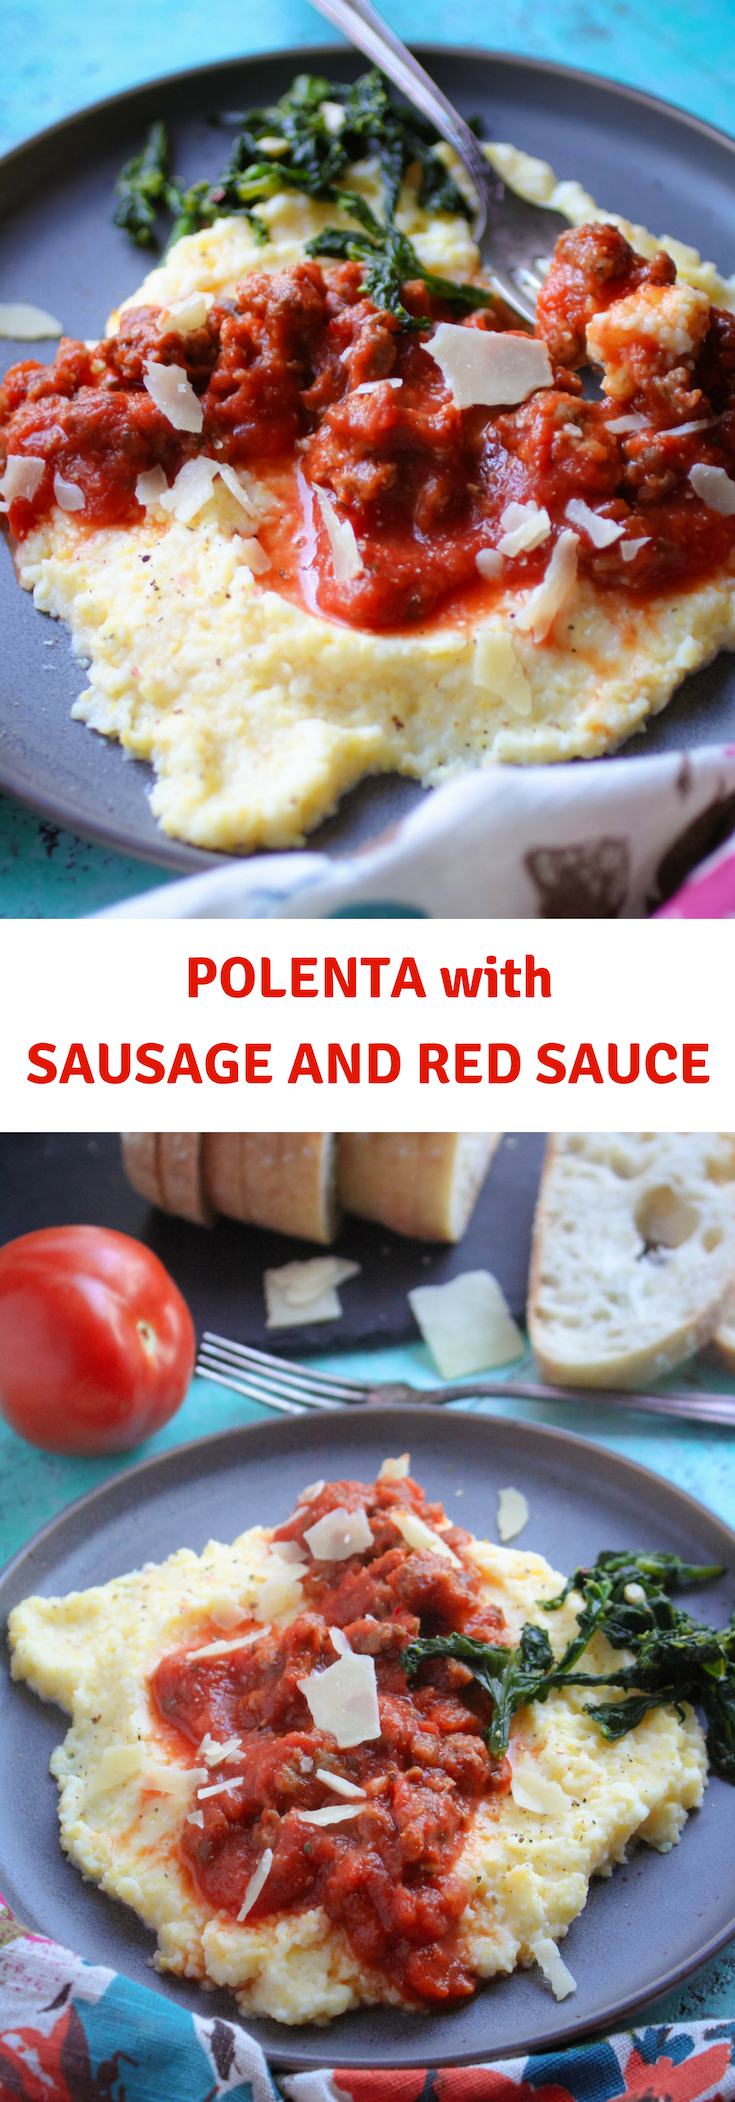 Polenta with Sausage and Red Sauce is a hearty, satisfying dish for the winter weather. Polenta with Sausage and Red Sauce is an easy, comforting meal to make.